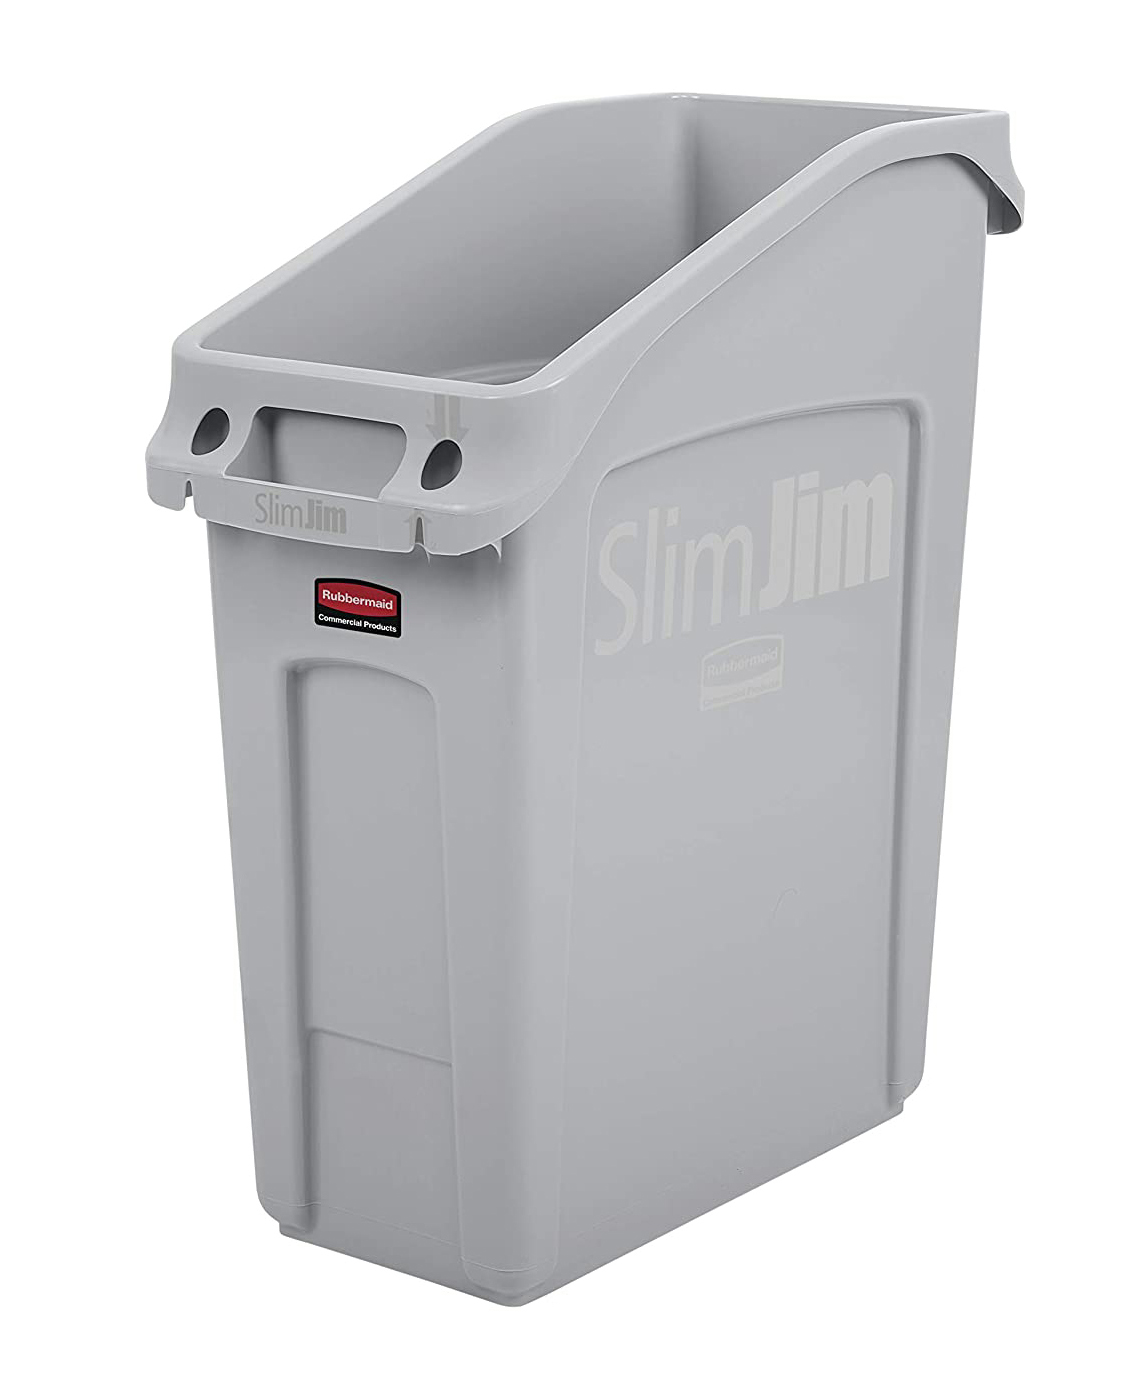 Rubbermaid® Slim Jim™ Under-Counter Container, 49.2L Capacity, Grey